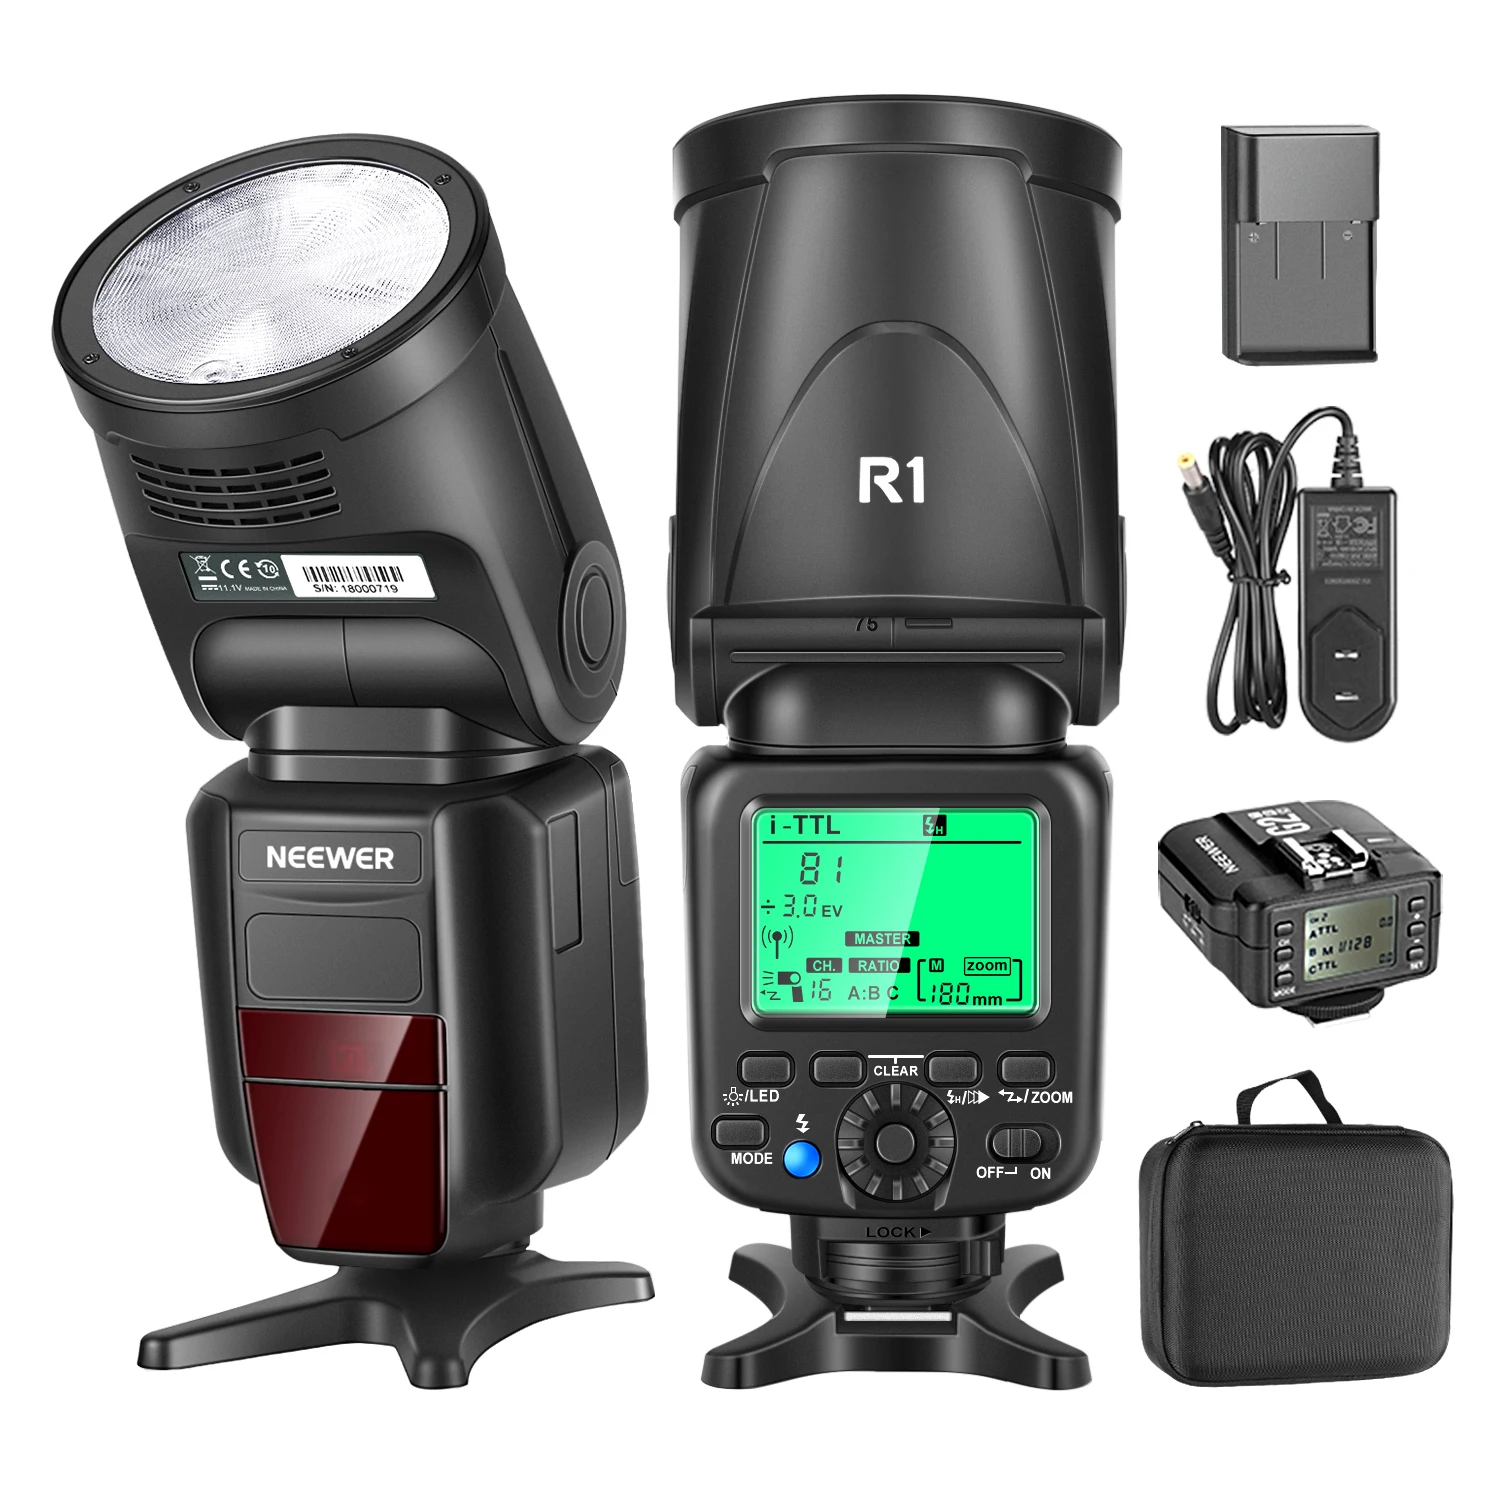 

Neewer R1 TTL Flash Speedlite for Nikon DSLR Cameras, 76Ws 2.4G TTL Round Head, 1/8000s HSS, 2.1s Recycle Time, Lithium Battery